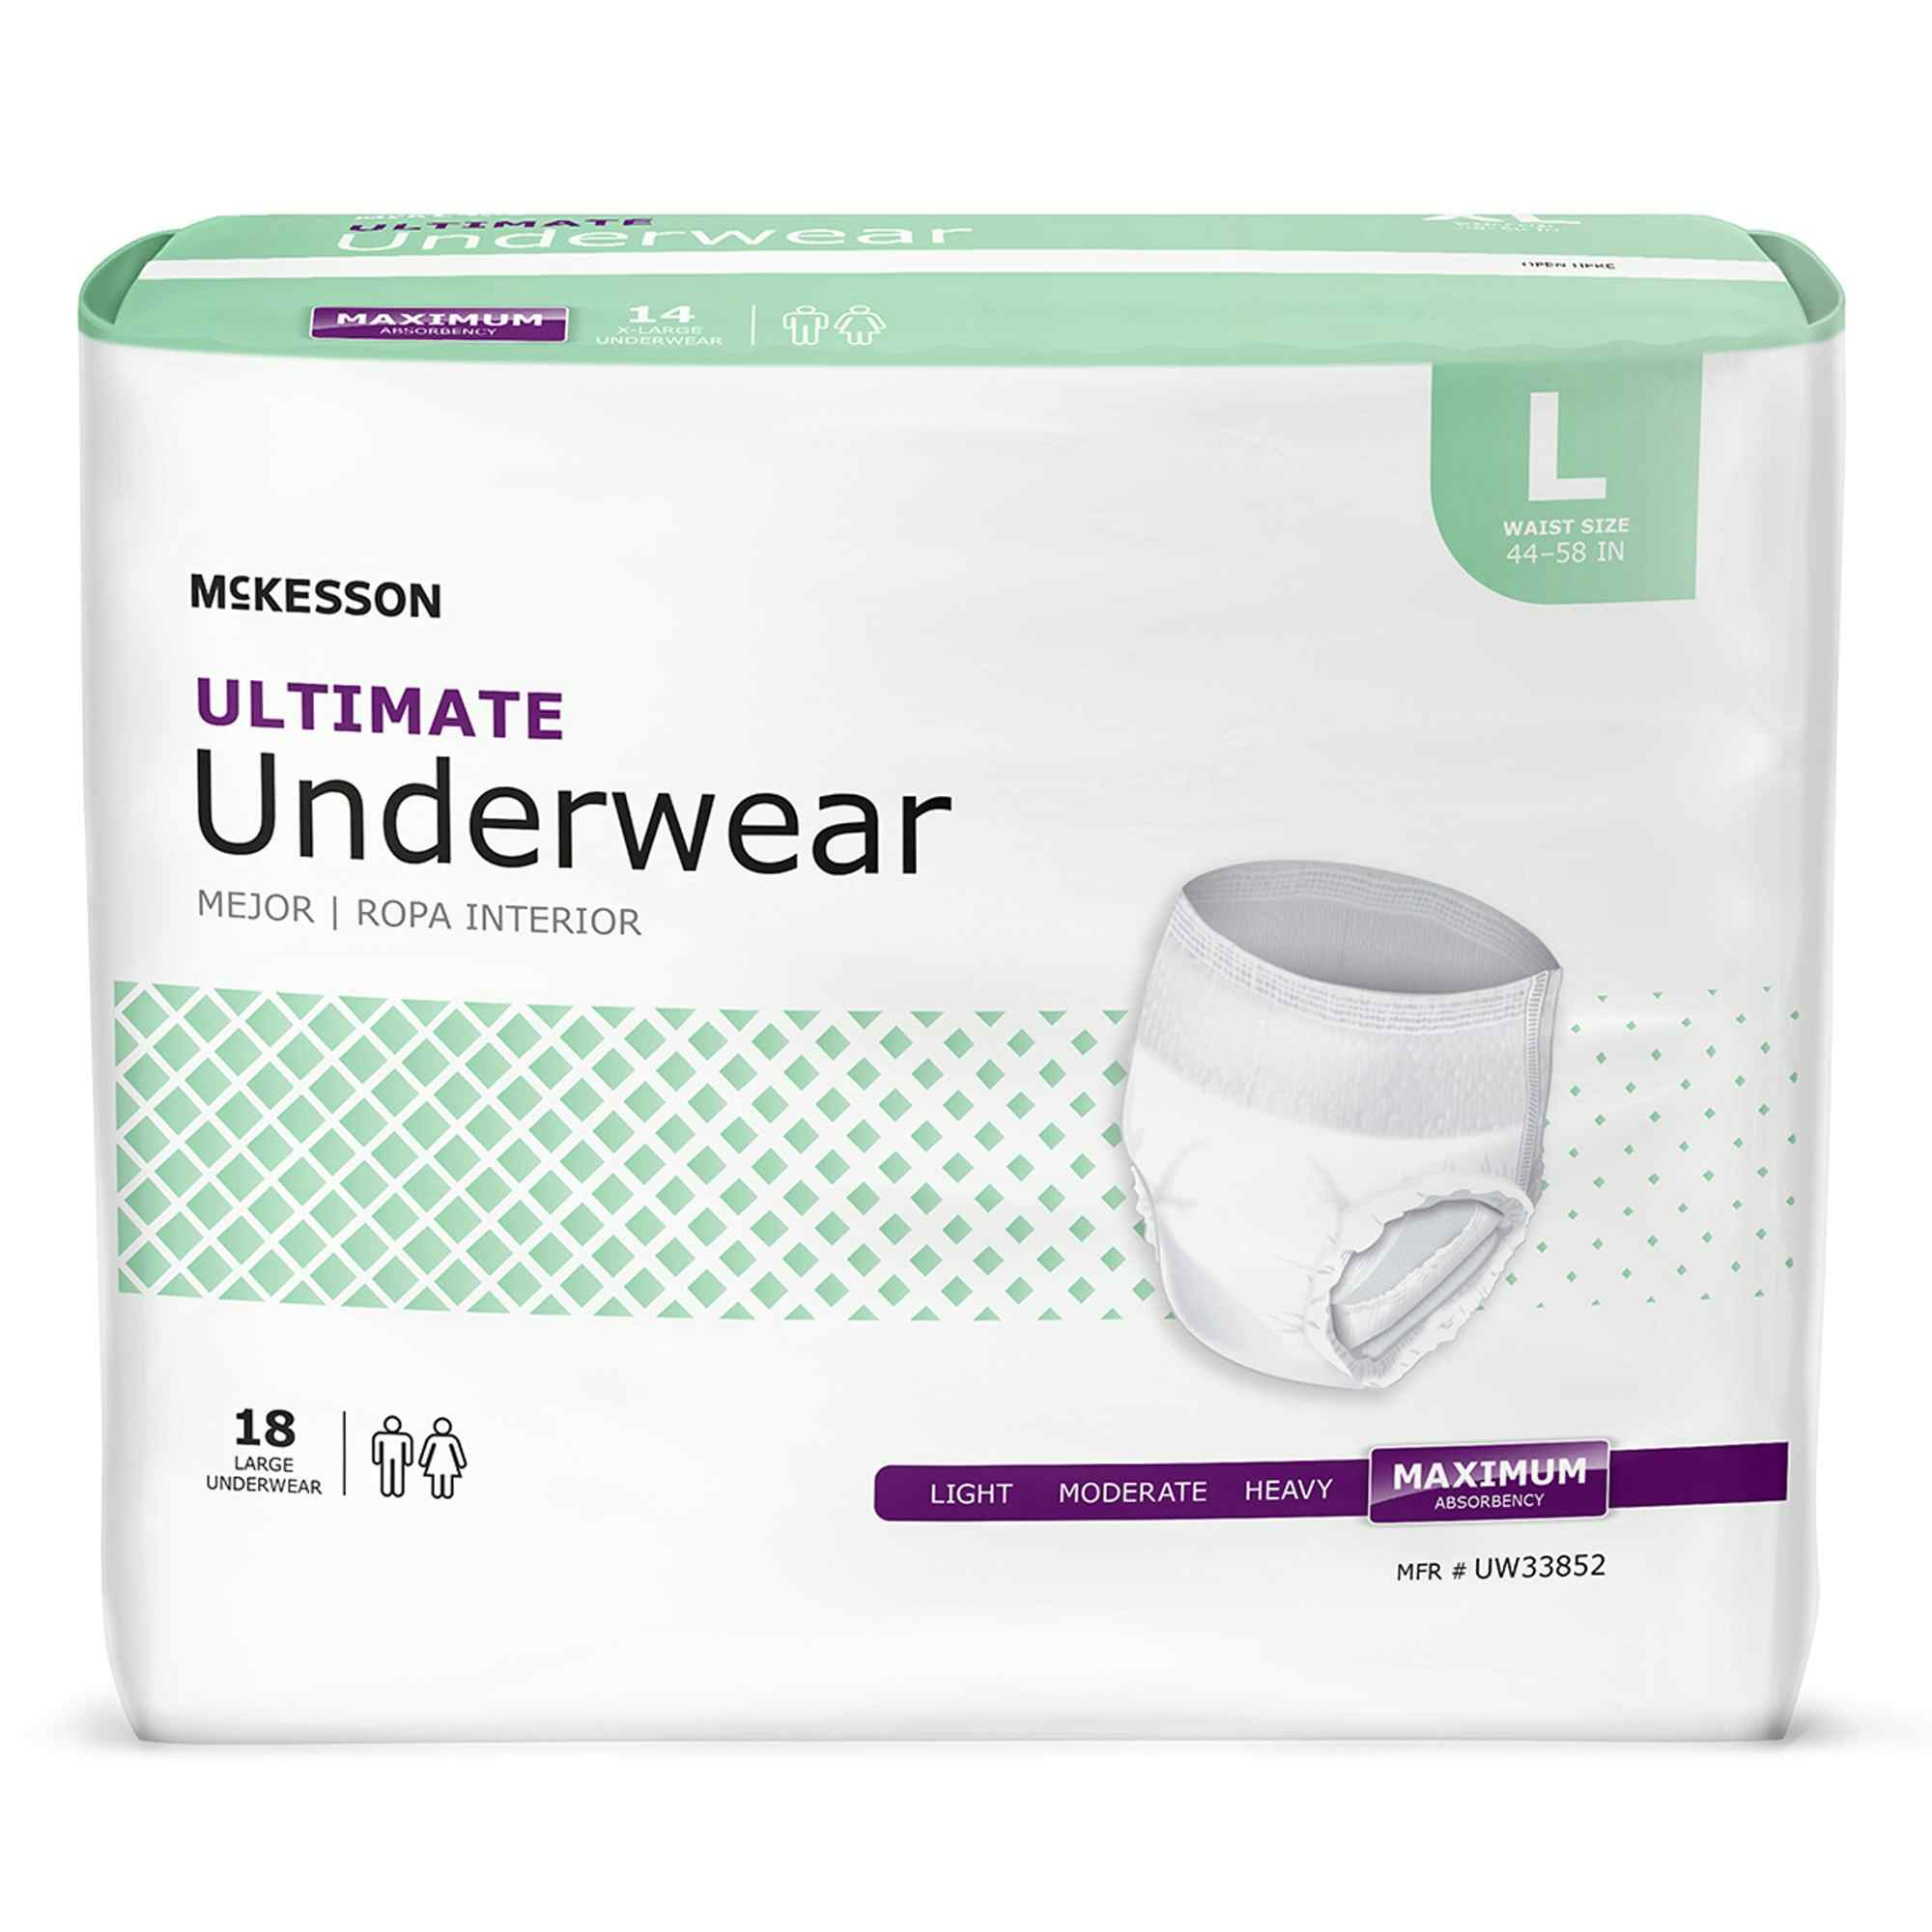 McKesson Unisex Adult Absorbent Pull-On, Heavy Absorbency, UW33852, Large (44-58") - Case of 80